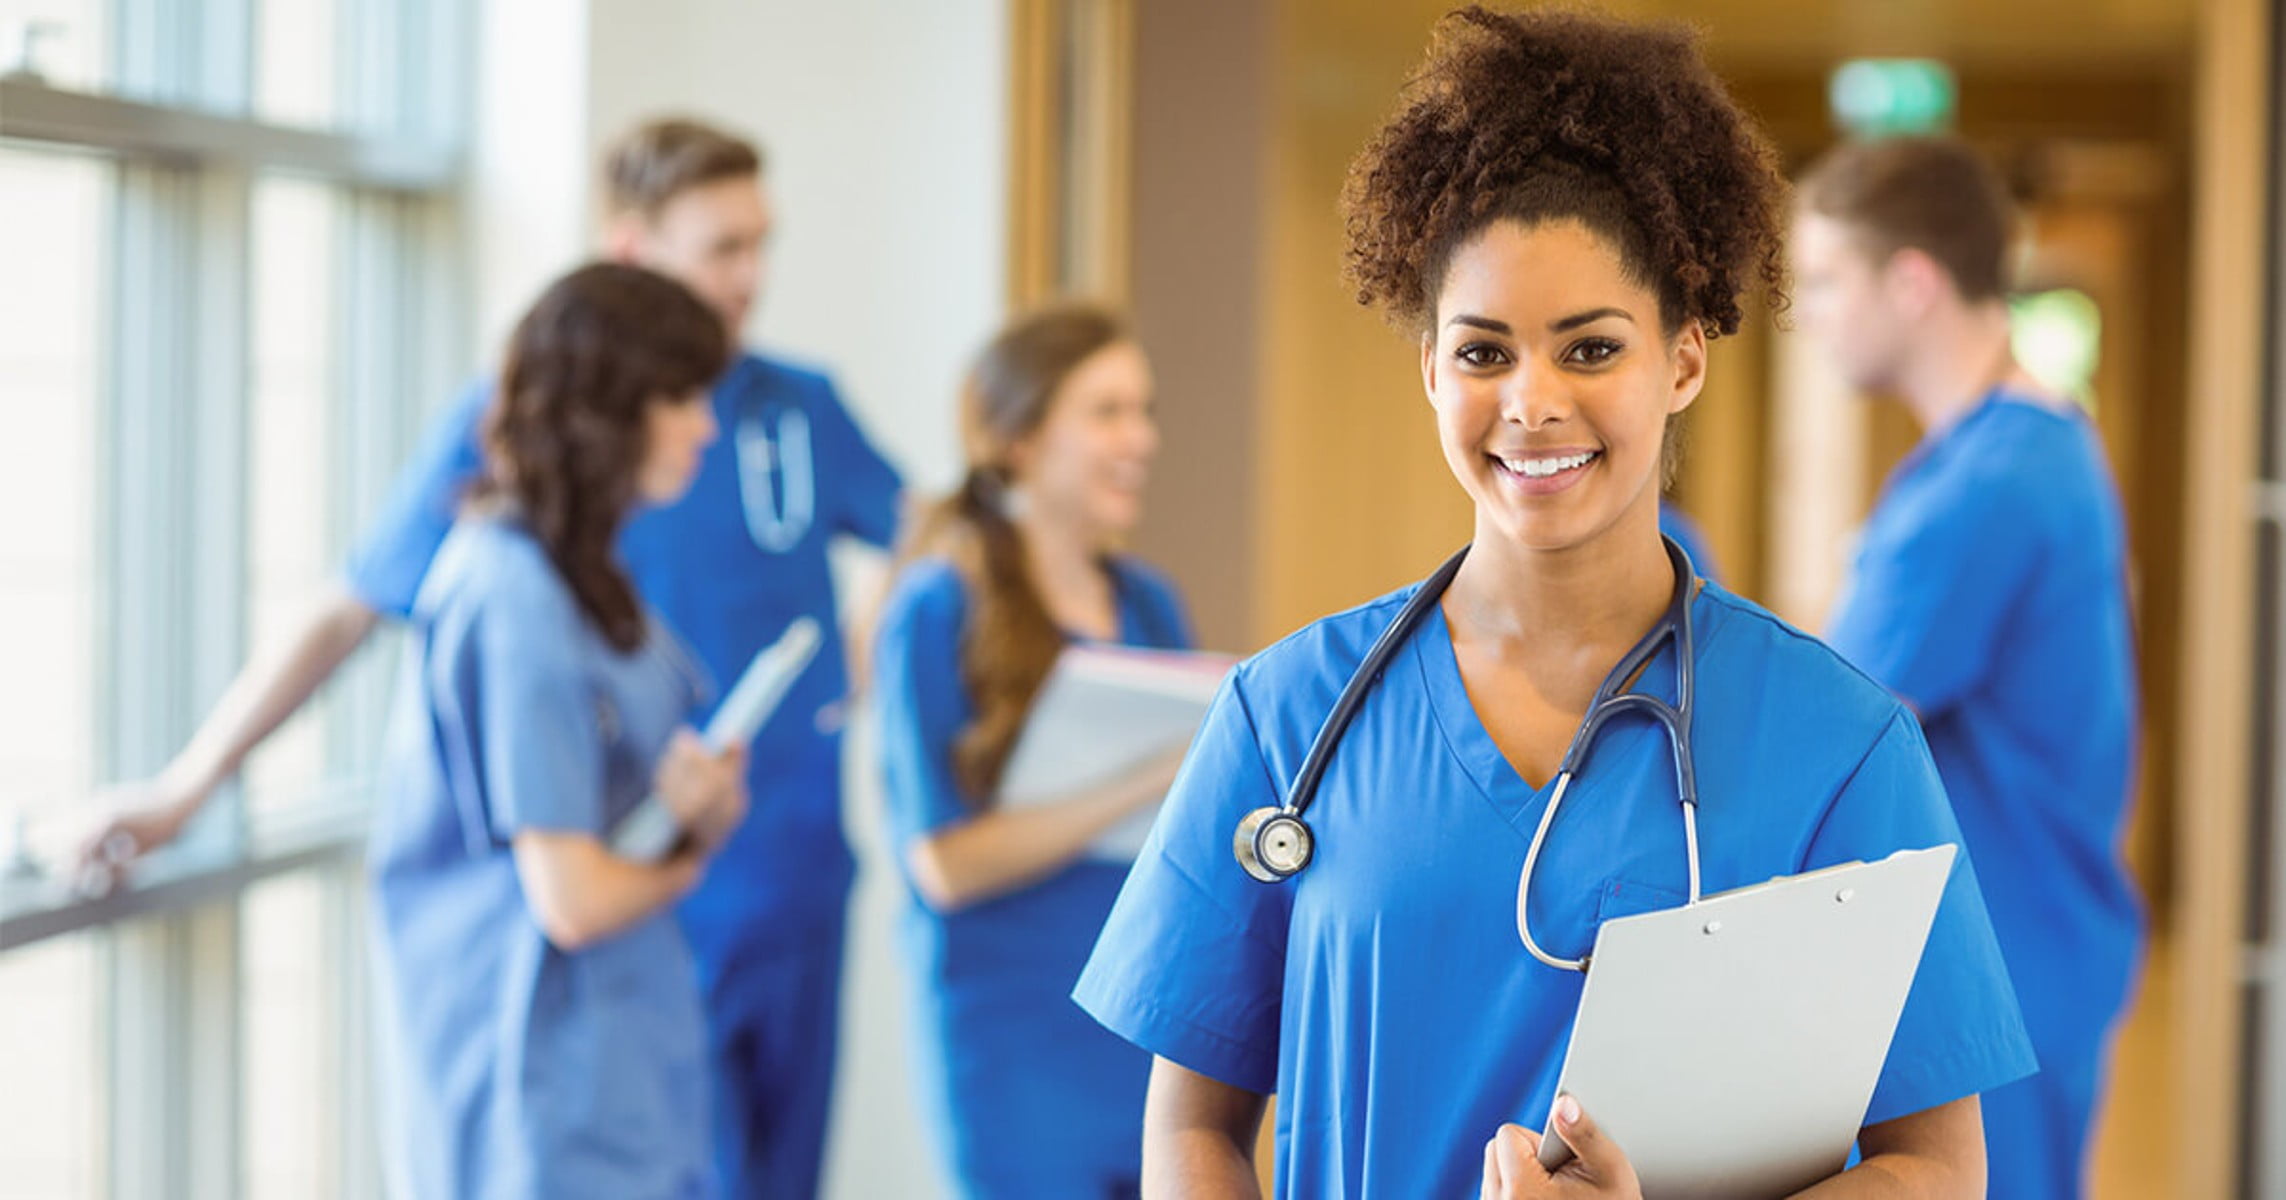 MBBS In Sweden: Entry Requirements, Free Tuition, Scholarships